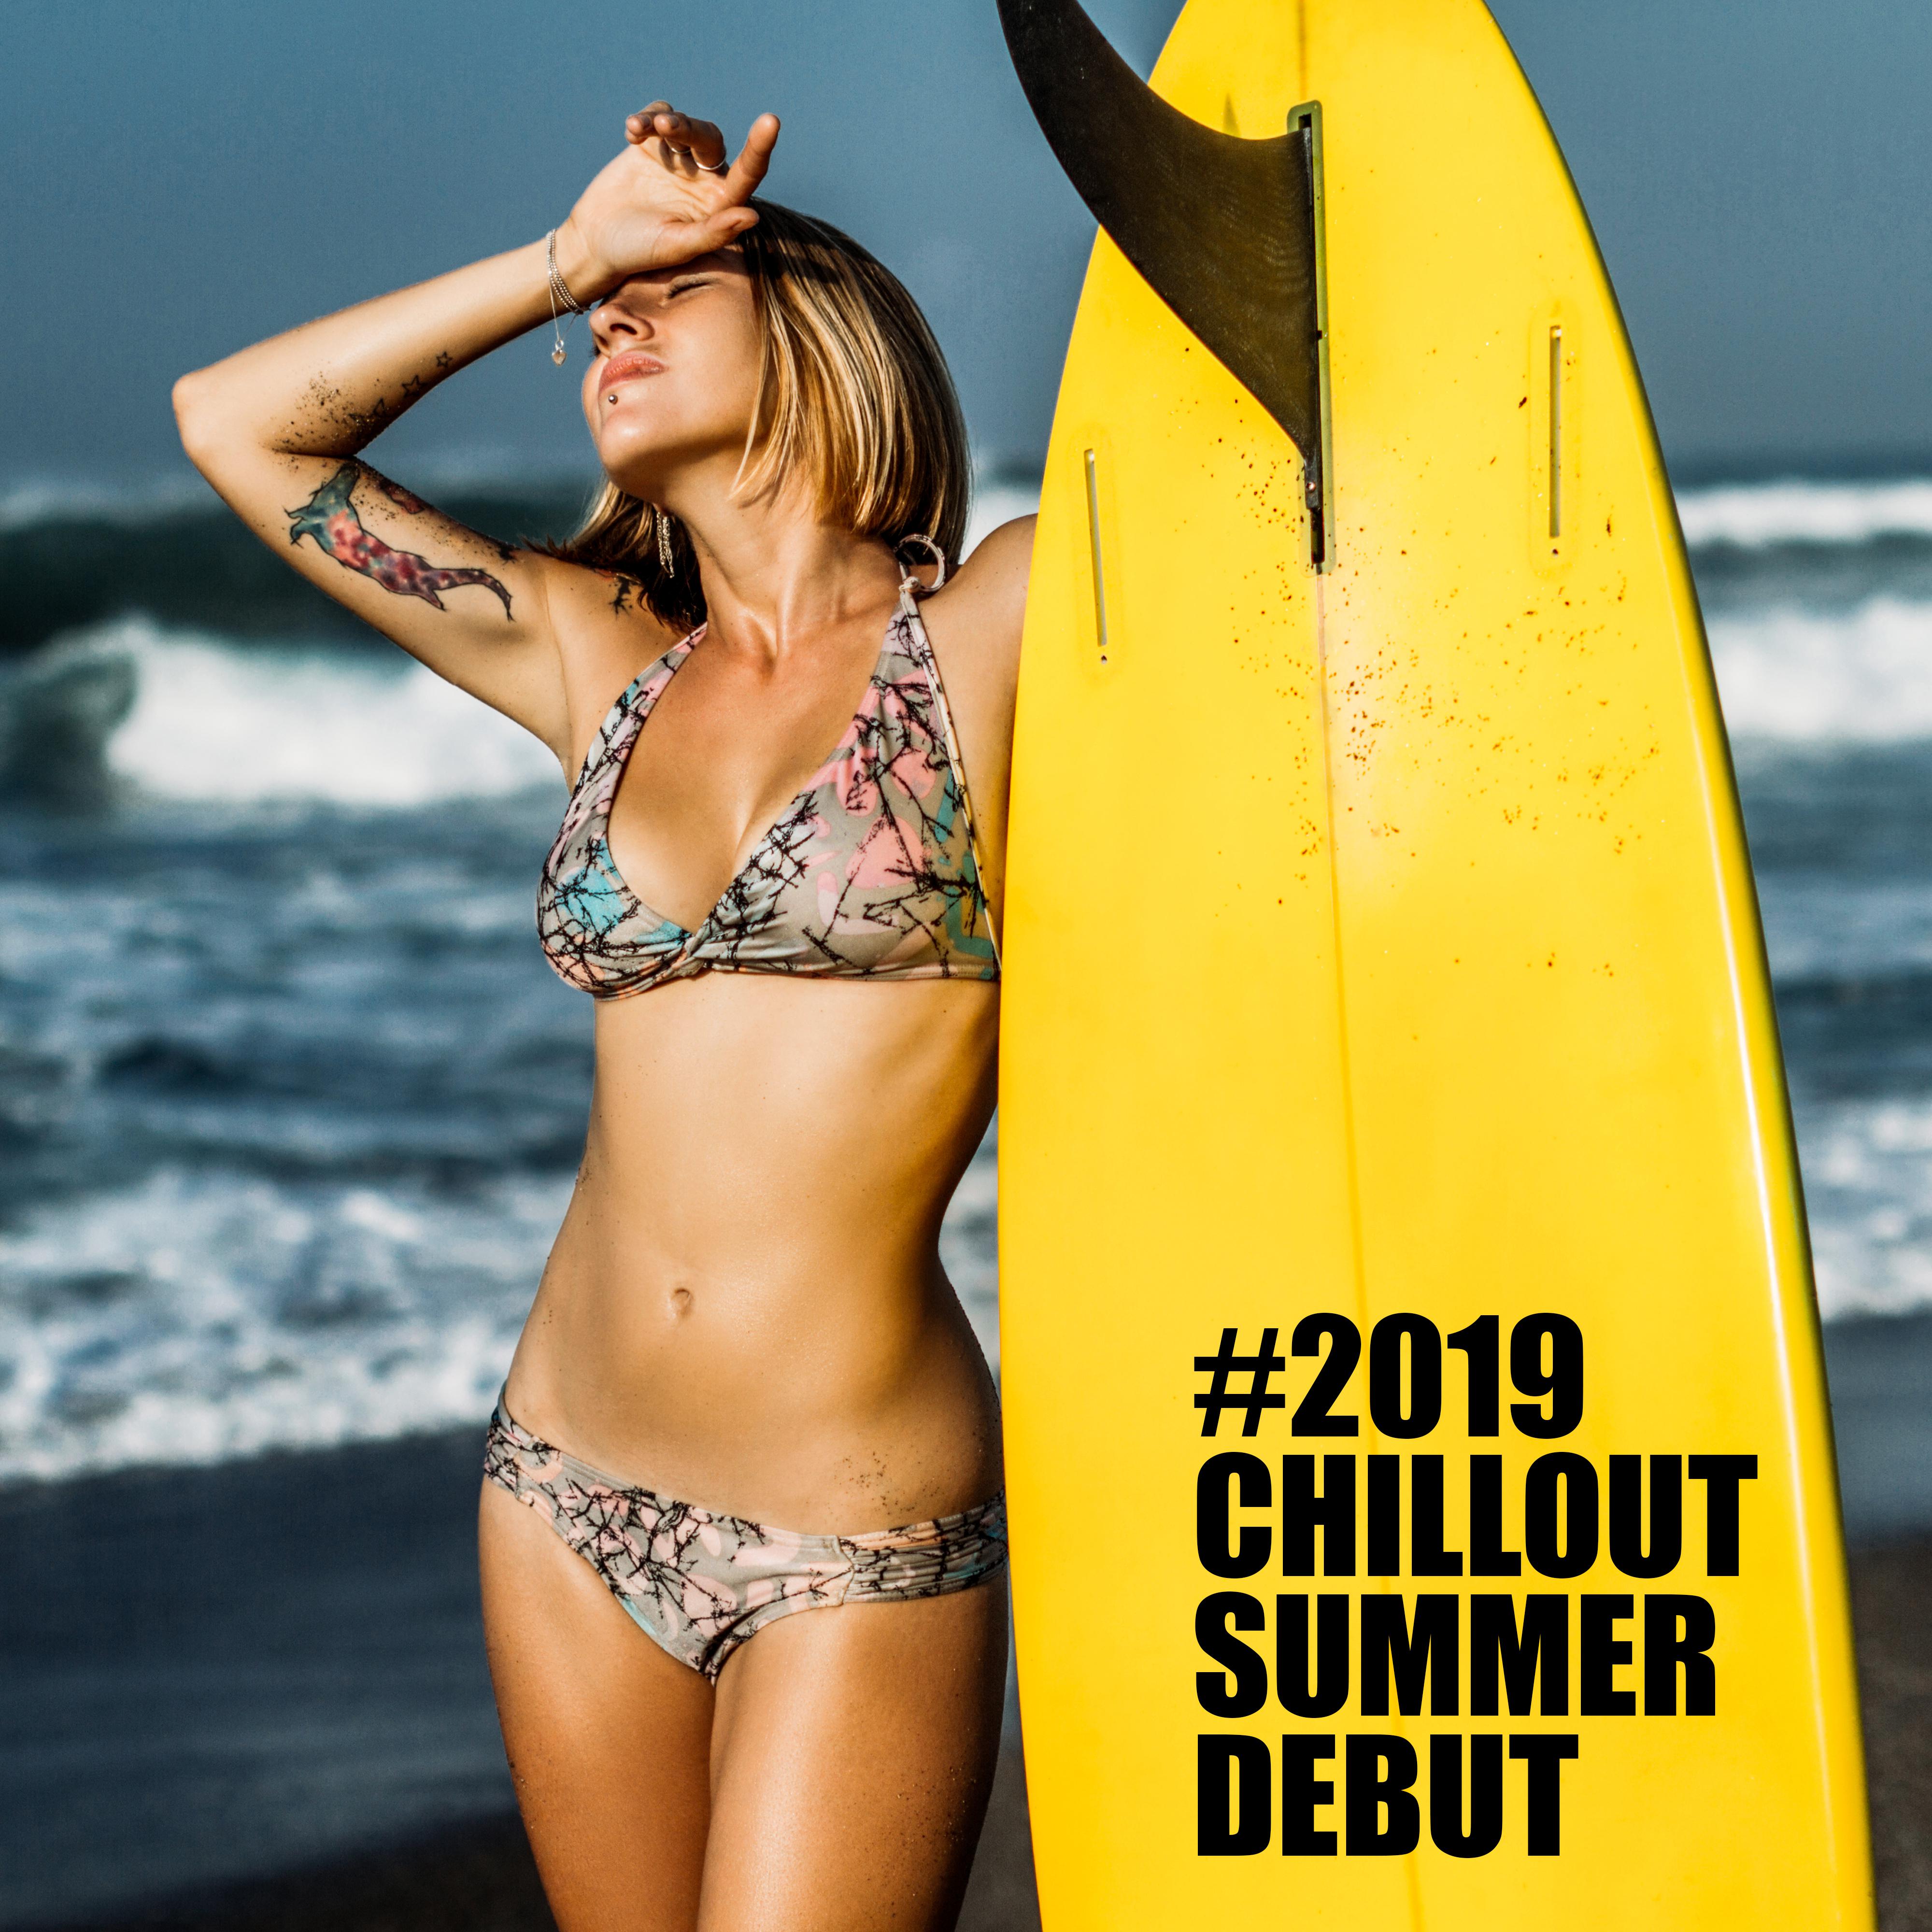 #2019 Chillout Summer Debut: The First Musical Novelties for Summer 2019, Summer Version of the Chillout, Music for Partying, Dancing or Relaxing and Resting